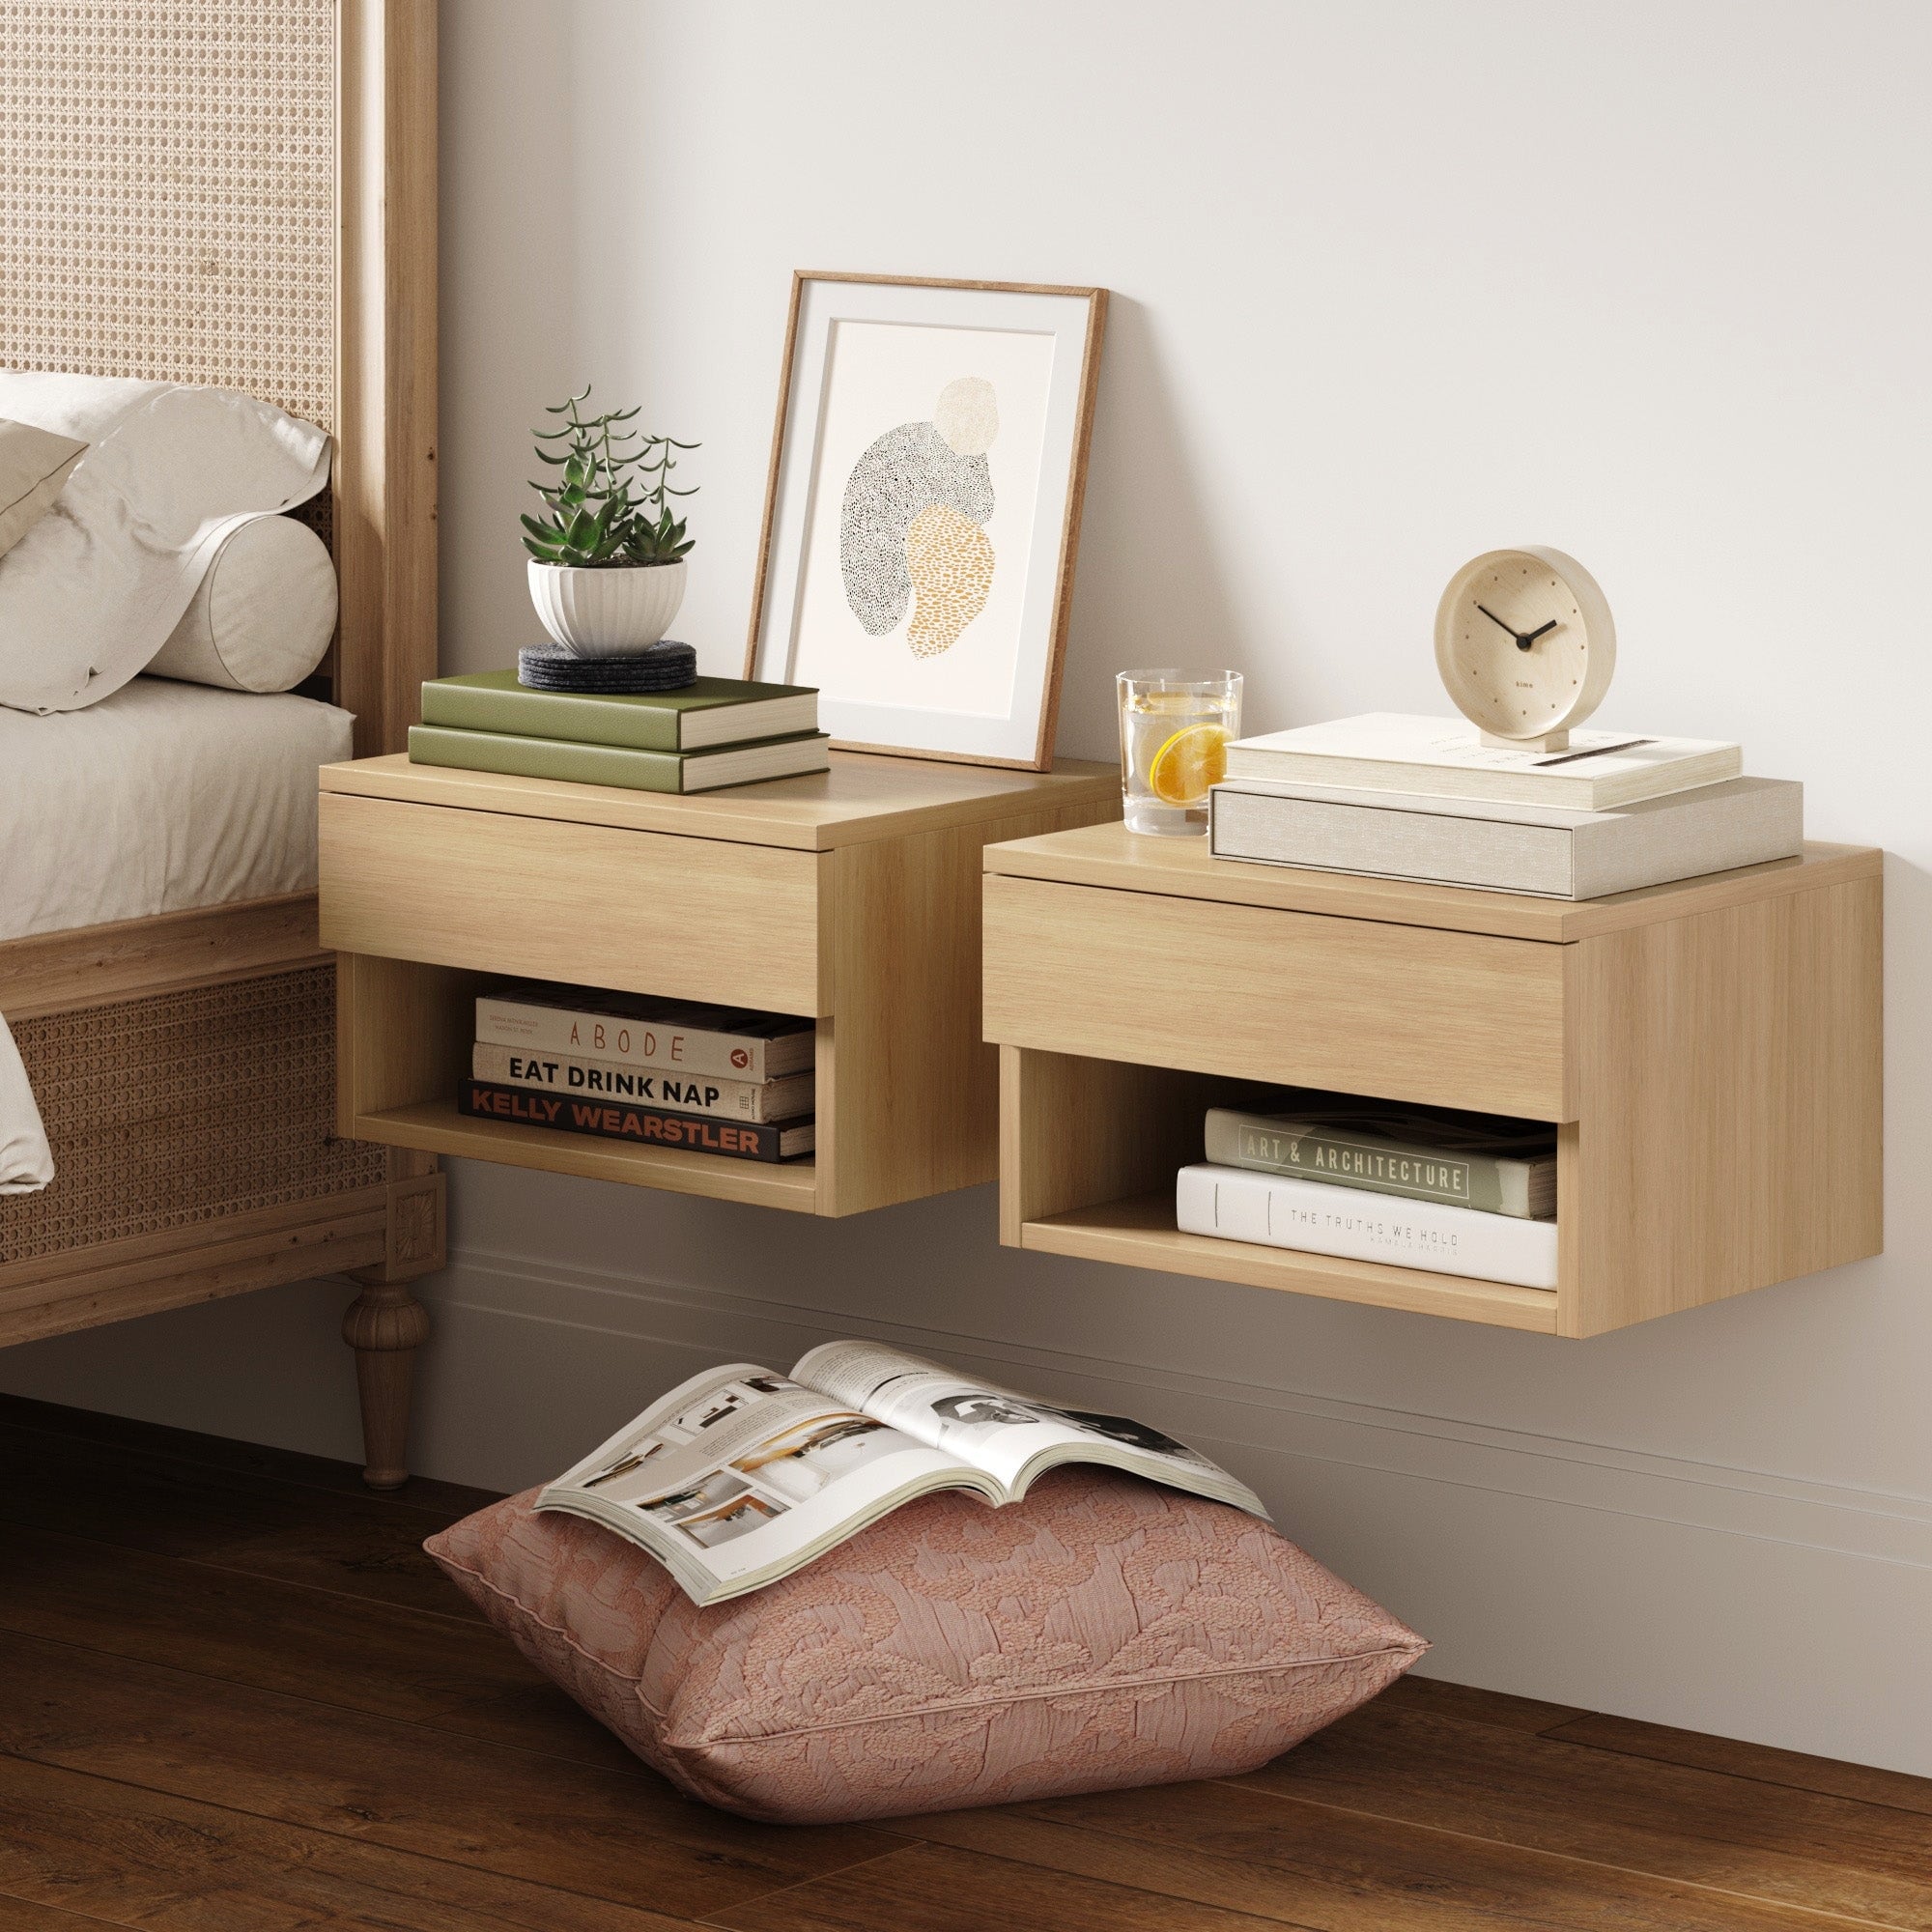 Floating Nightstand, Small Modern Floating Nightstand with Drawer, Floating  Shelves for Bedroom, Bathroom,Brown Walnut